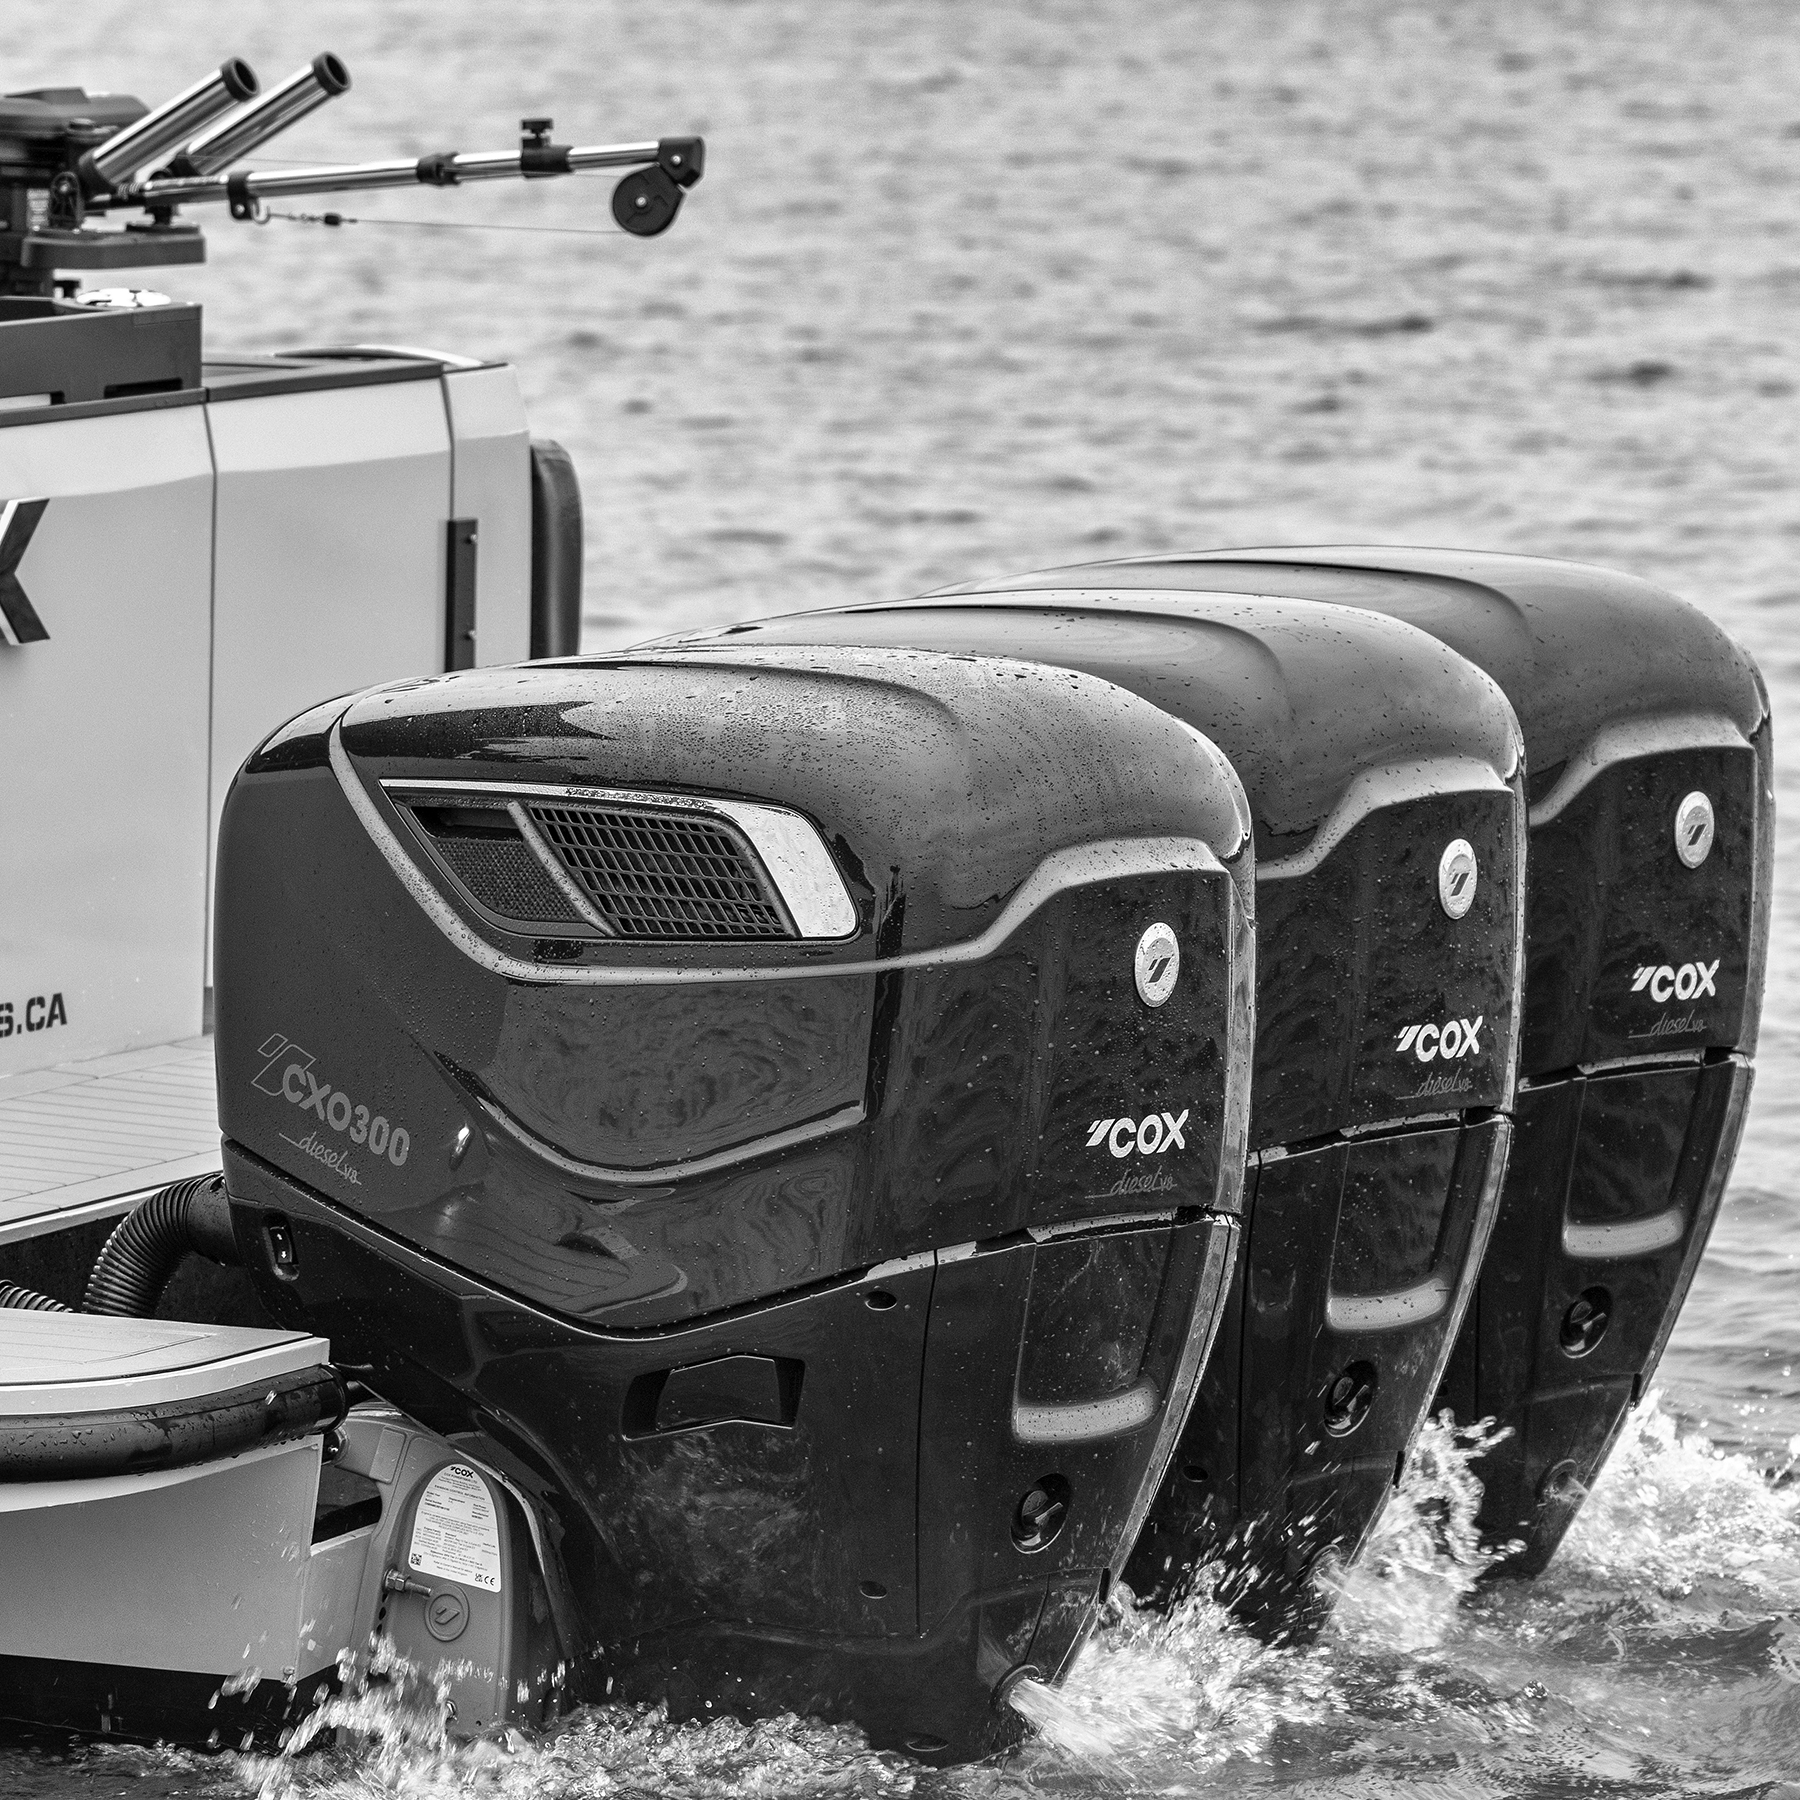 CXO 300 Cox Diesel Outboard Engines